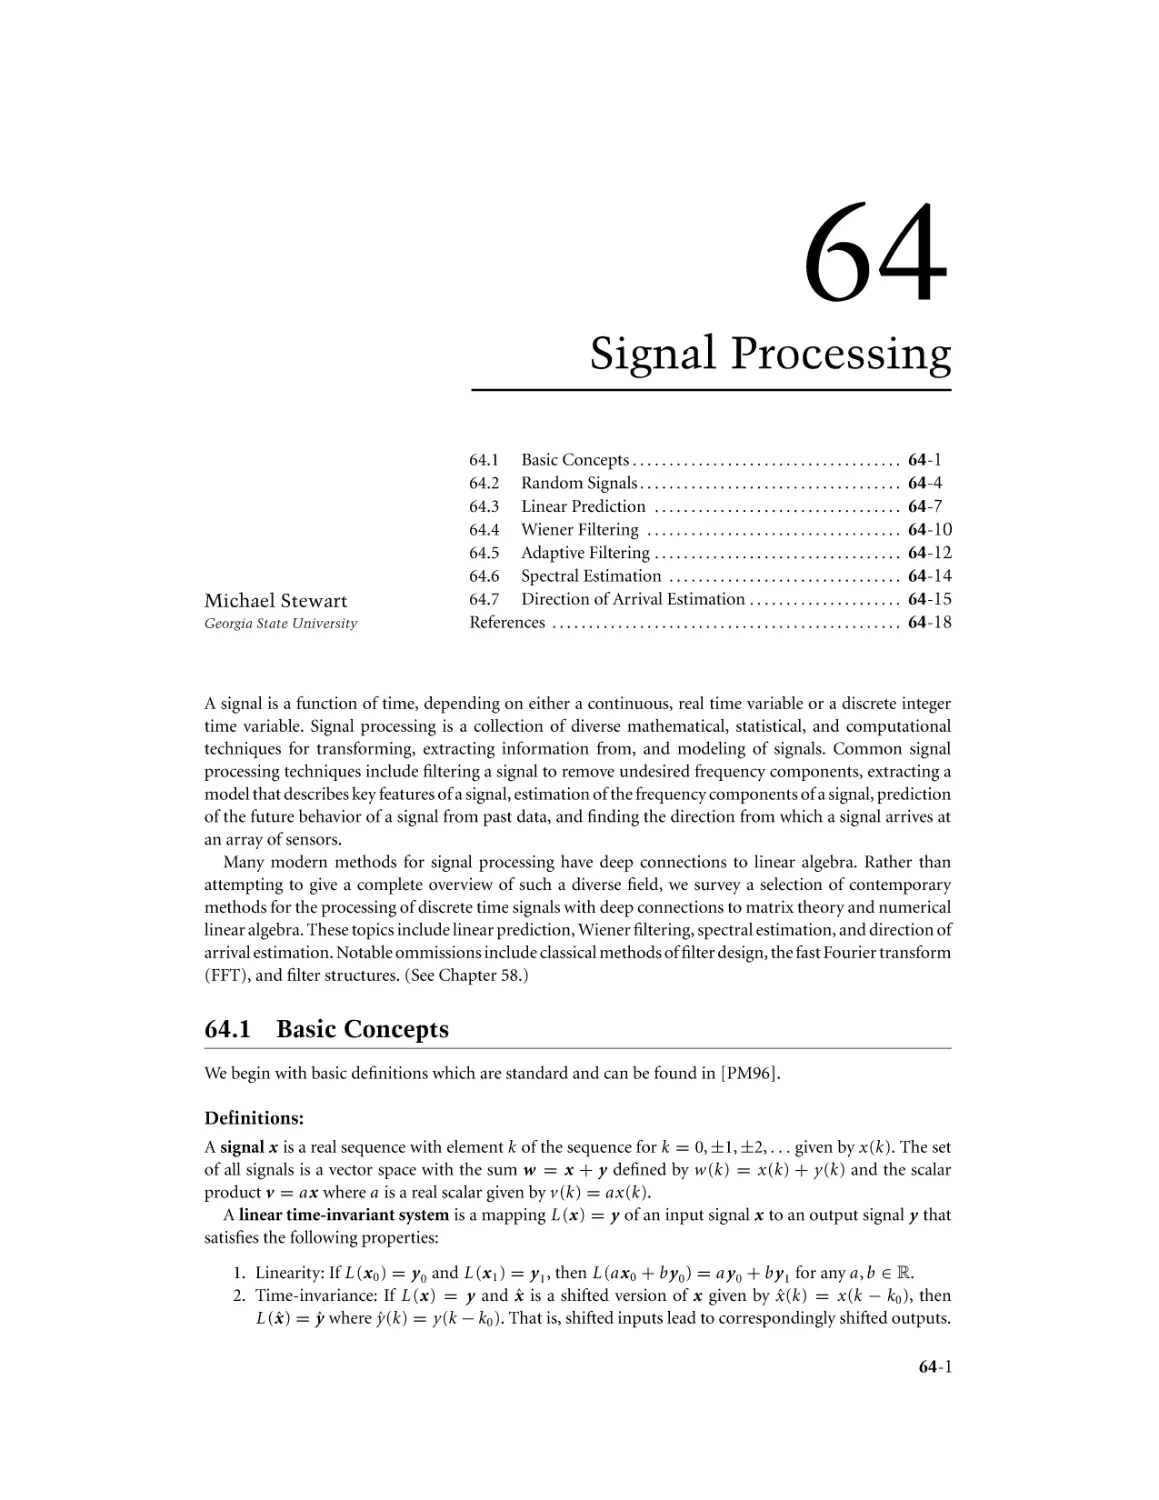 Chapte 64. Signal Processing